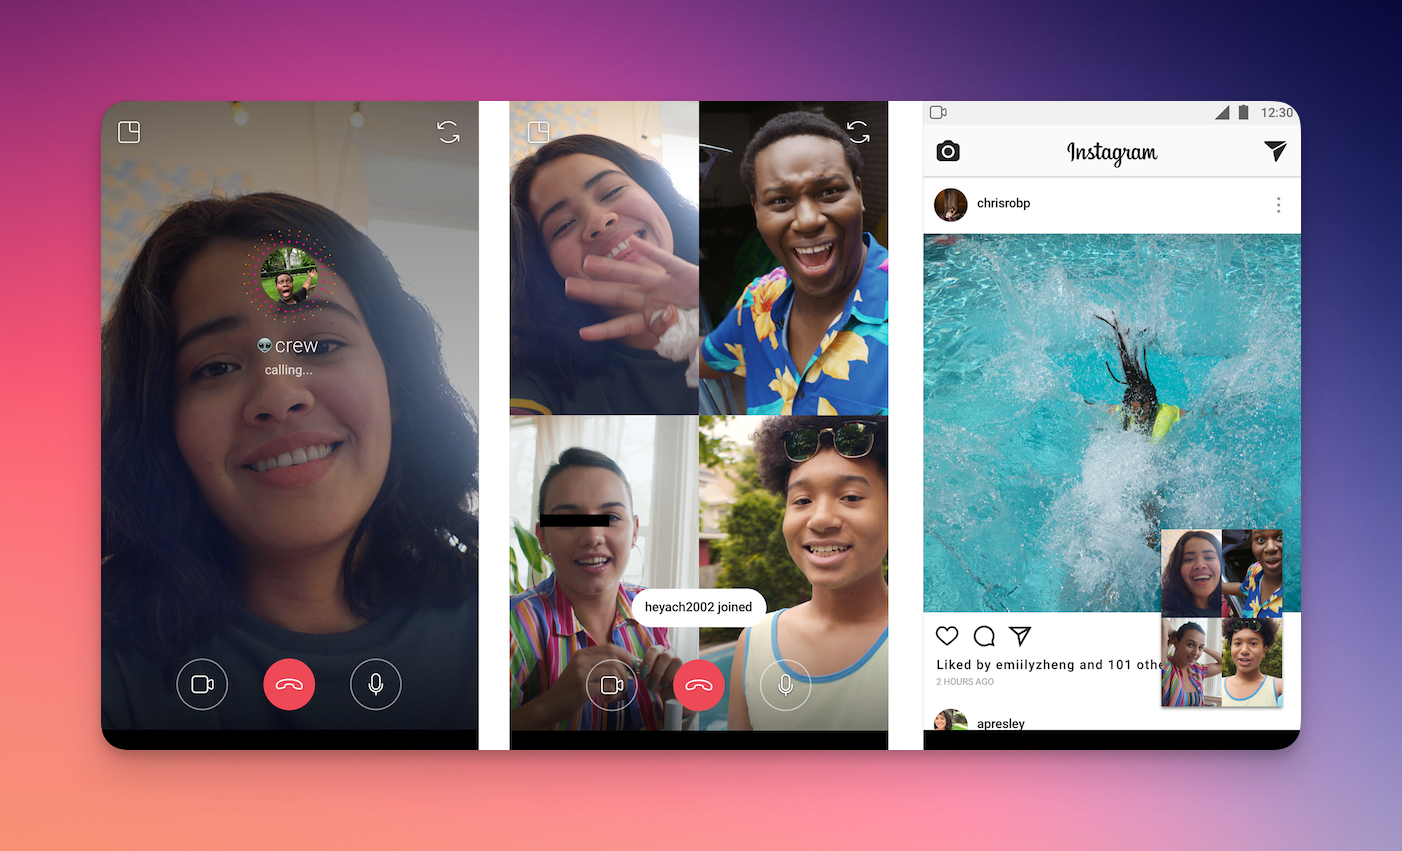 Remote.tools shows an image of a Instagram video call and browsing the Instagram feed while on call. Source: Tech Crunch